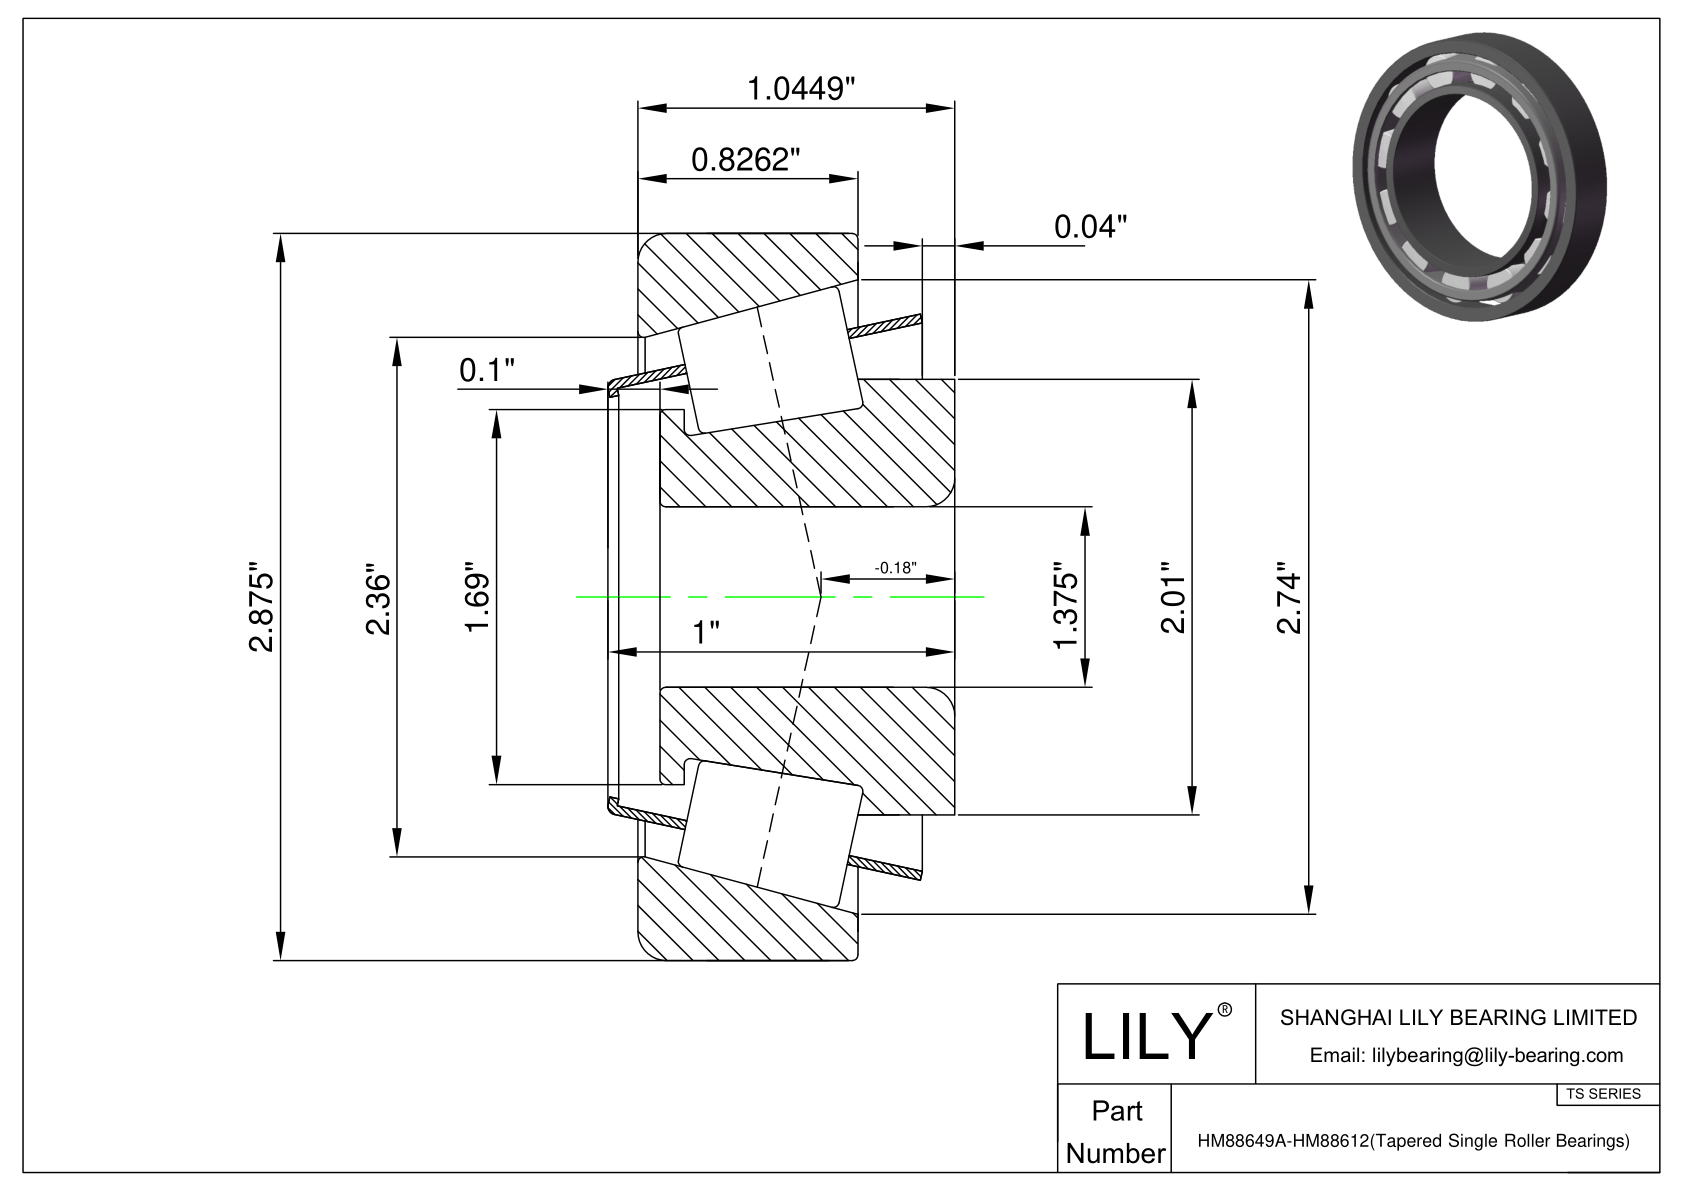 HM88649A-HM88612 TS (Tapered Single Roller Bearings) (Imperial) cad drawing